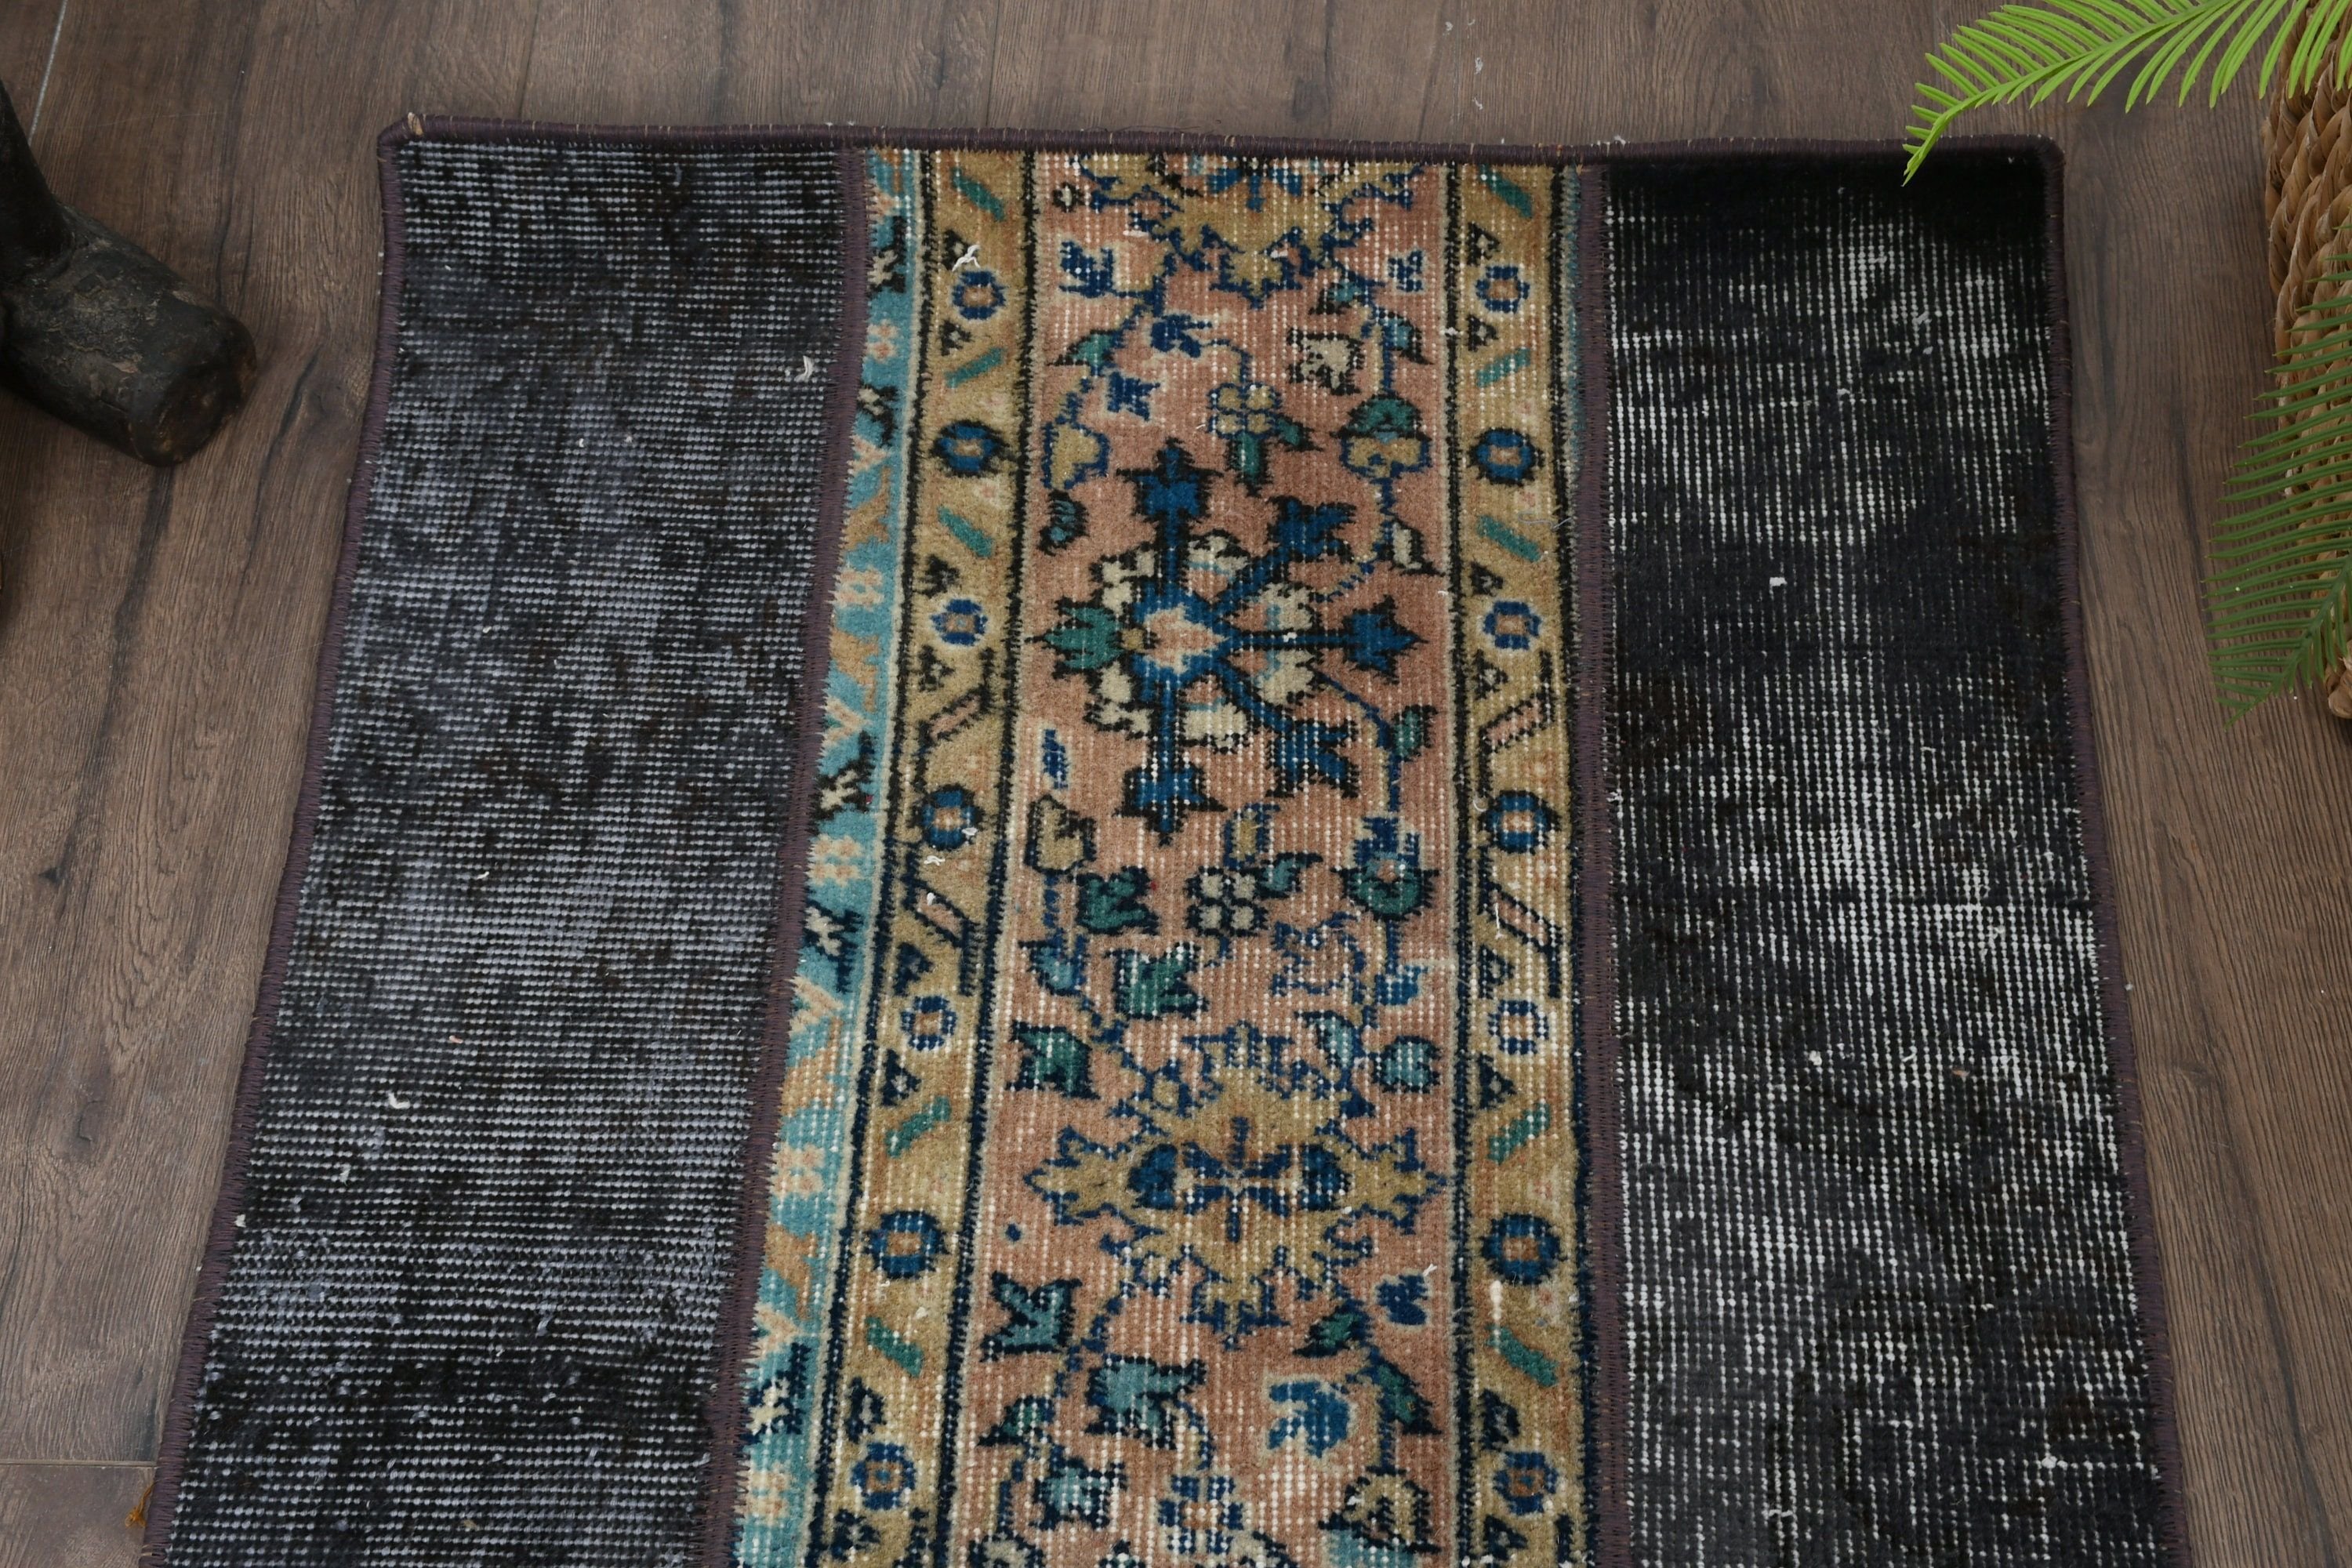 Pastel Rug, Gray Bedroom Rugs, Kitchen Rugs, 2.1x3.4 ft Small Rug, Vintage Rugs, Turkish Rugs, Rugs for Car Mat, Car Mat Rug, Antique Rug